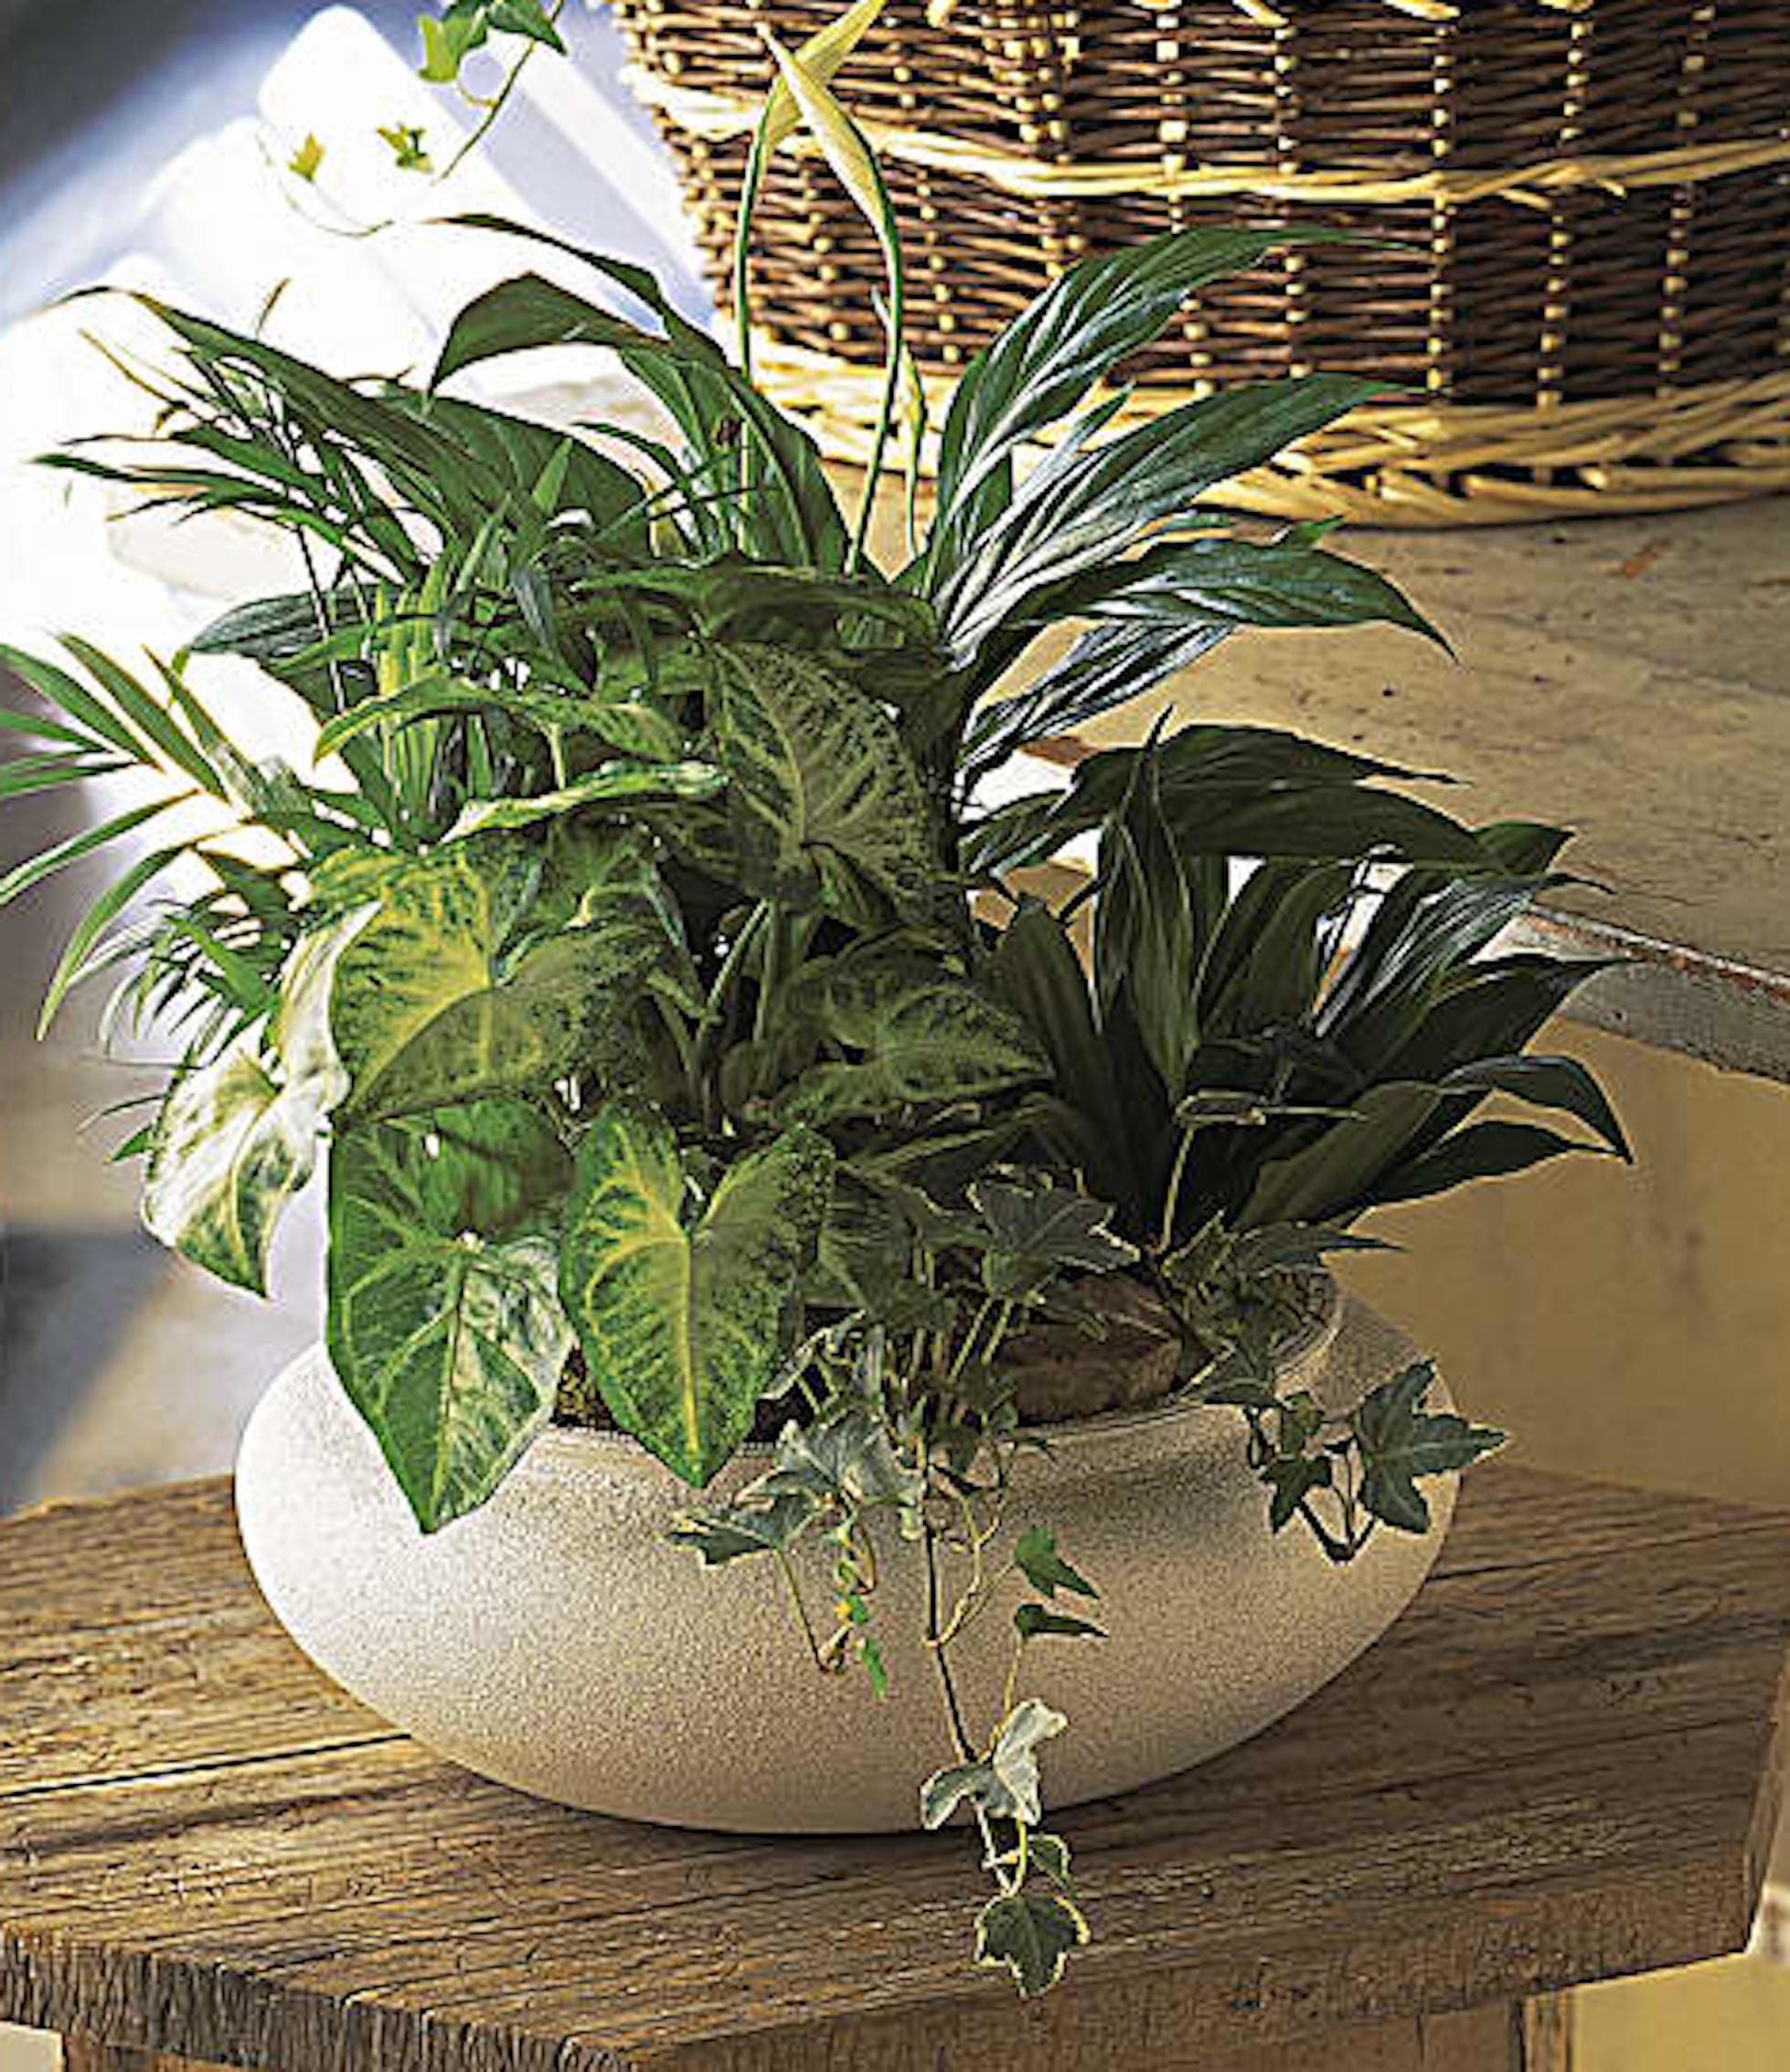 Dish Garden - Designers Choice - A ceramic planter of designers choice filled with a variety of green house plants appropriate for any service. Send them something they can keep and enjoy for a long time. Three sizes to choose from and designer can add a complimenting bow. State your color preference for the bow in instructions when ordering. Standard is approximately 10&quot; dish and Deluxe is approximately 12&quot; dish.